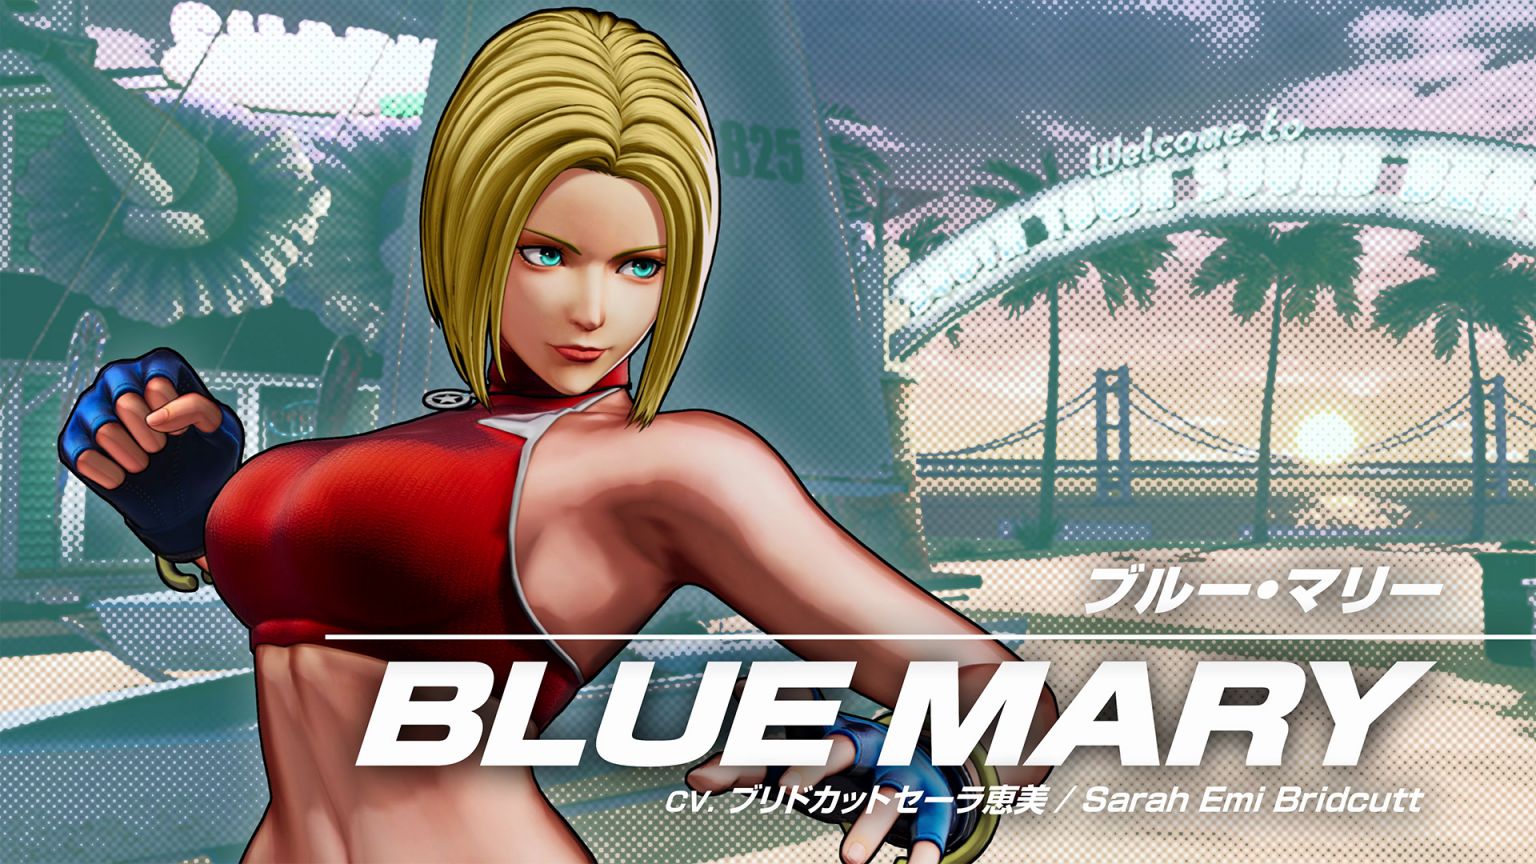 king of fighters 15 - blue mary - generacion xbox